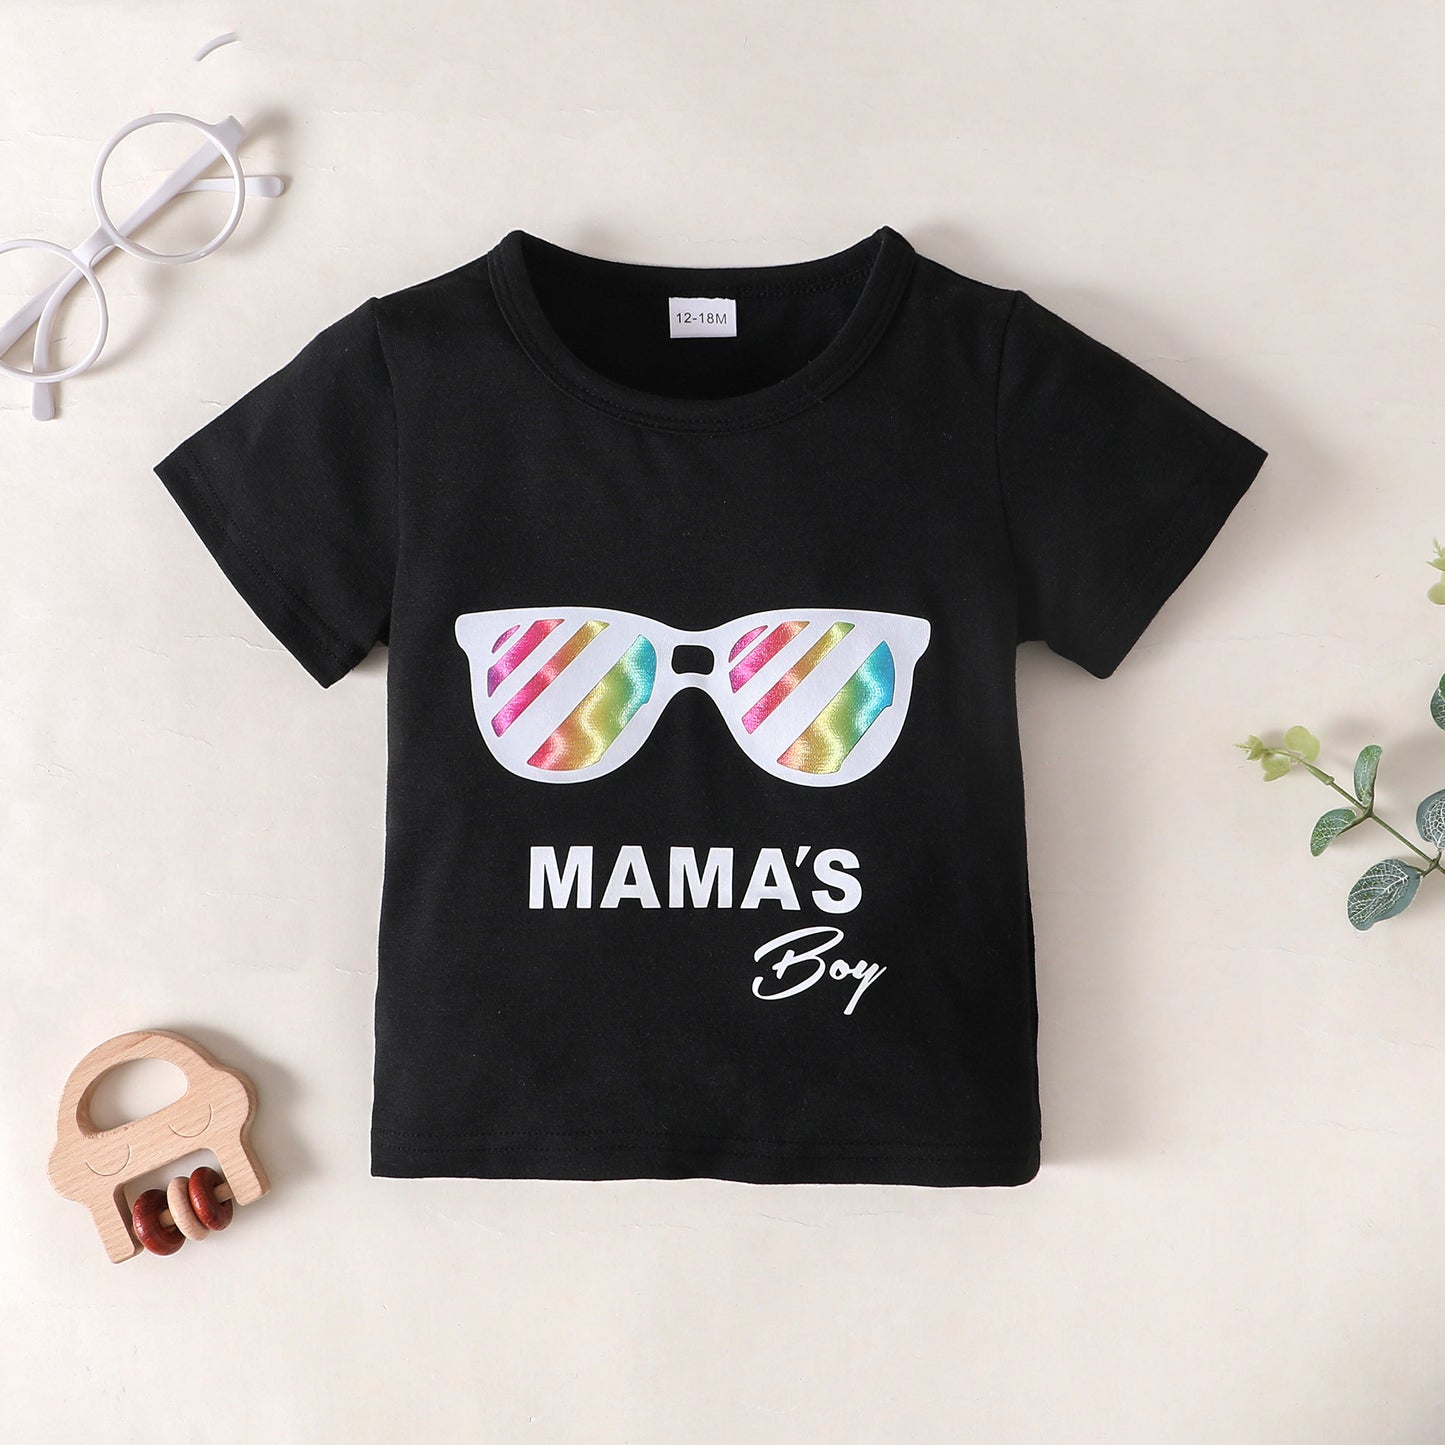 Children’s Boys MAMA'S BOY Graphic T-Shirt and Camouflage Shorts Set